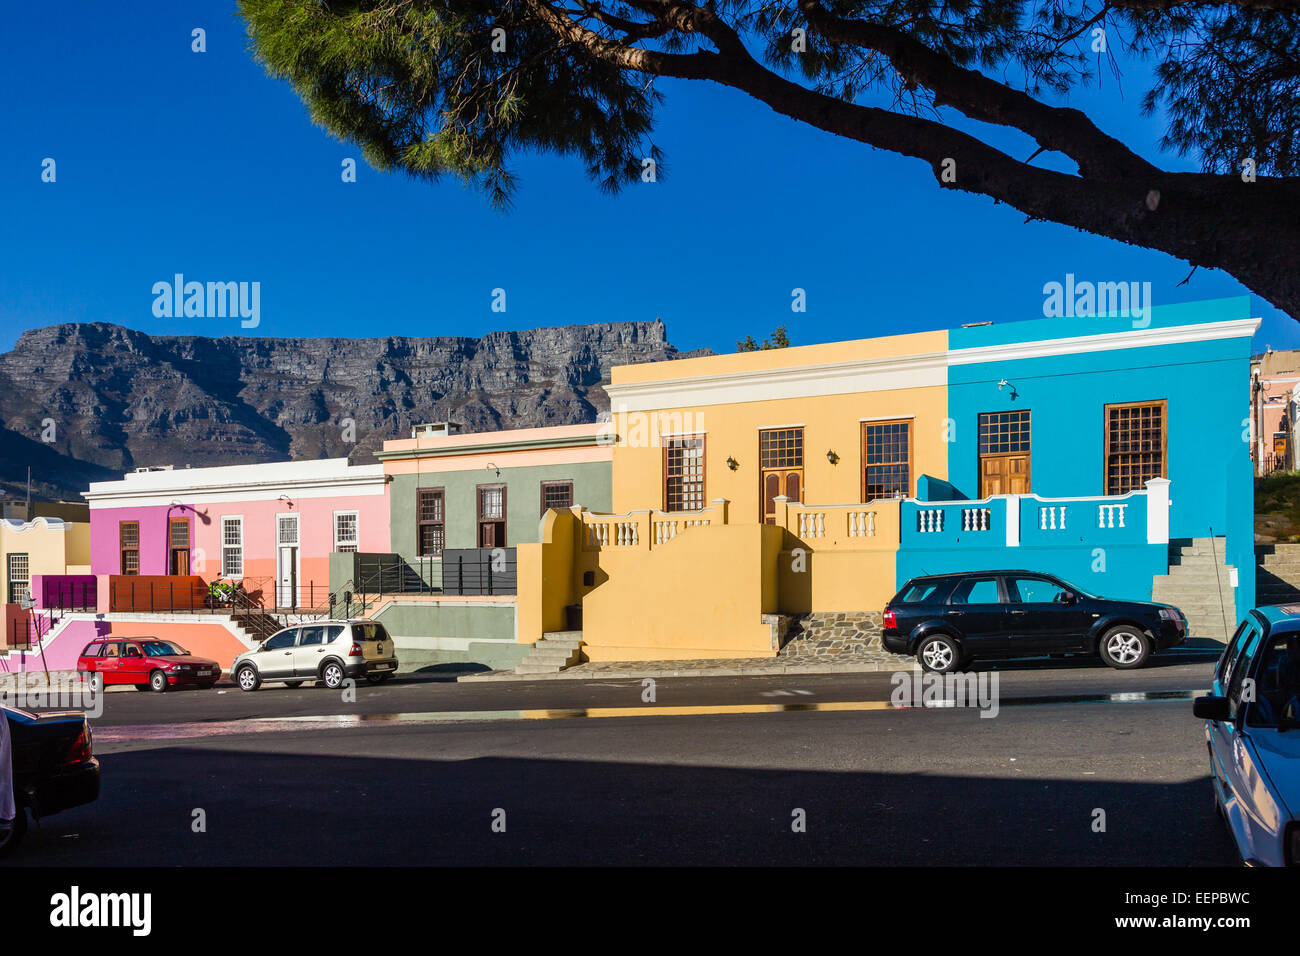 The Cape Malay community is an ethnic community in Capetown with much history. Stock Photo